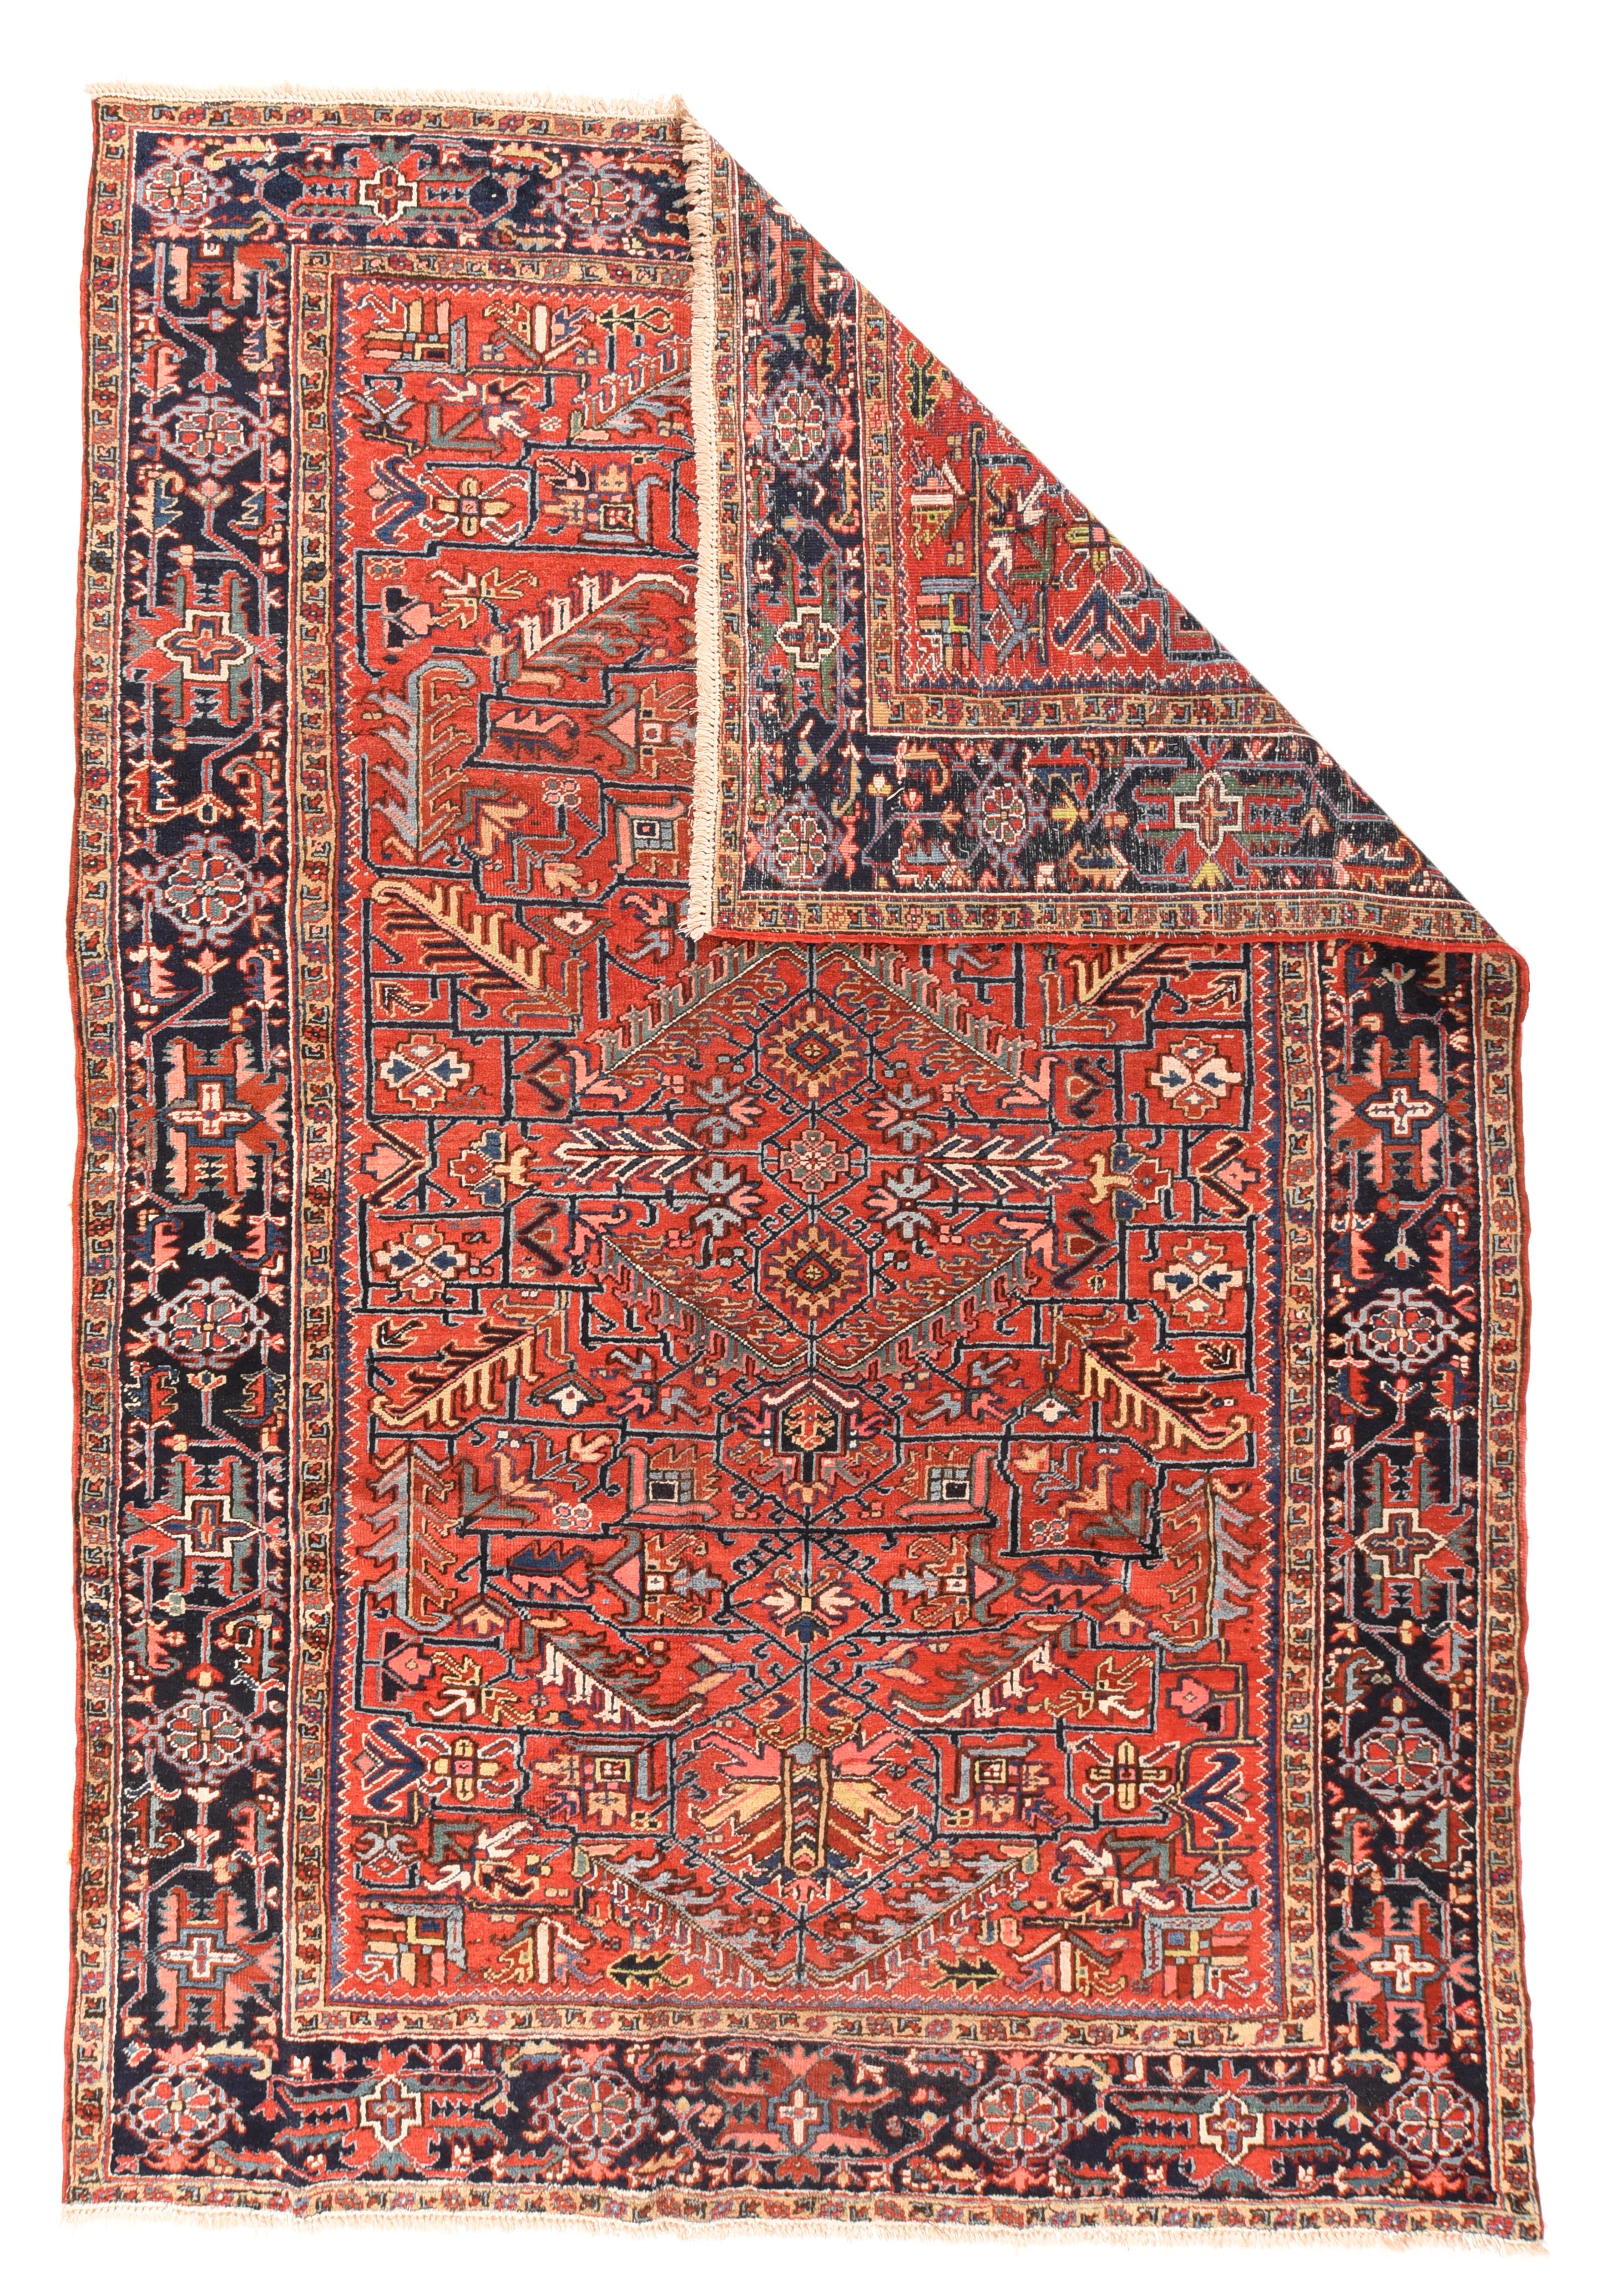 Vintage Heriz rug. Measures: 7.8'' x 11'. Iconically Mehriban, with a soft red red ground supporting a plethora of fringed and flame-edged bitonal leaves in straw, cream, chocolate, palest blue and light teal blue. An ashik, herringbone leaf and